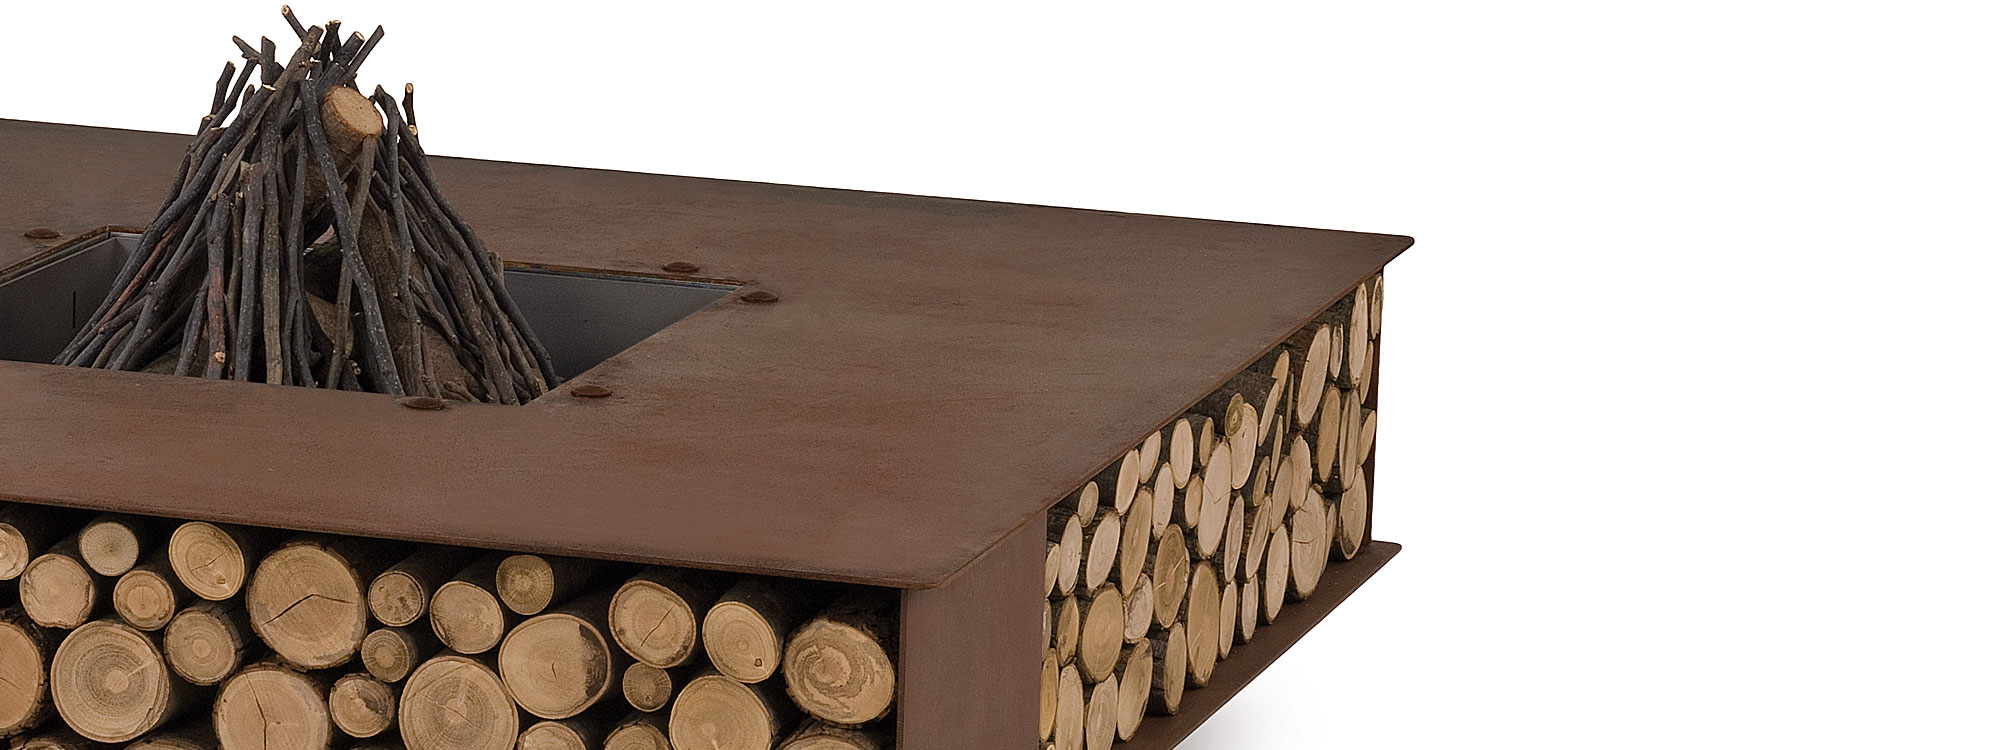 Image of AK47 Toast square fire pit in corten steel with logs and kindly ready to set alight